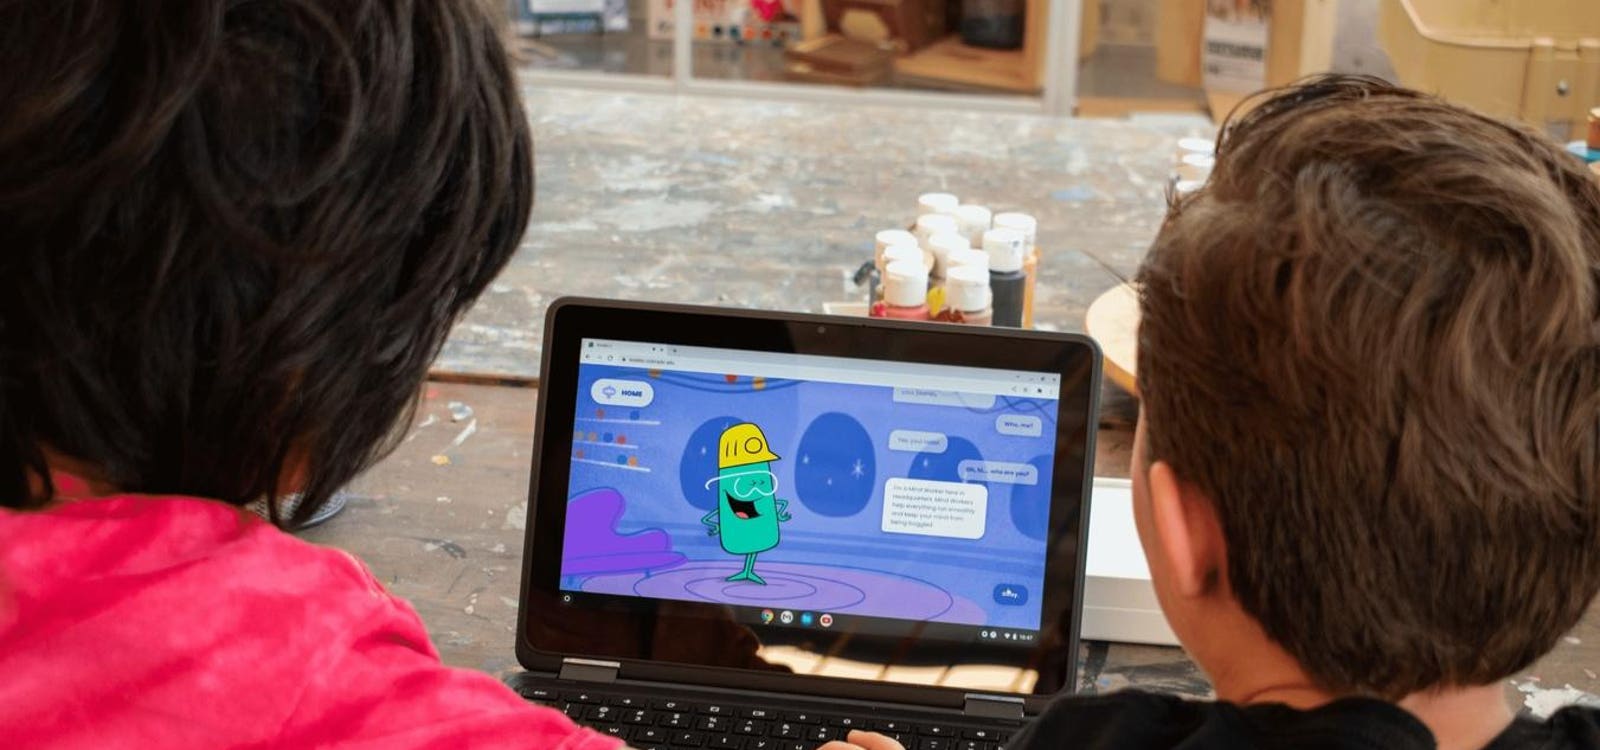 How ‘Inside Out’ Inspired An App Where Kids Can Meet And Befriend Their Emotions